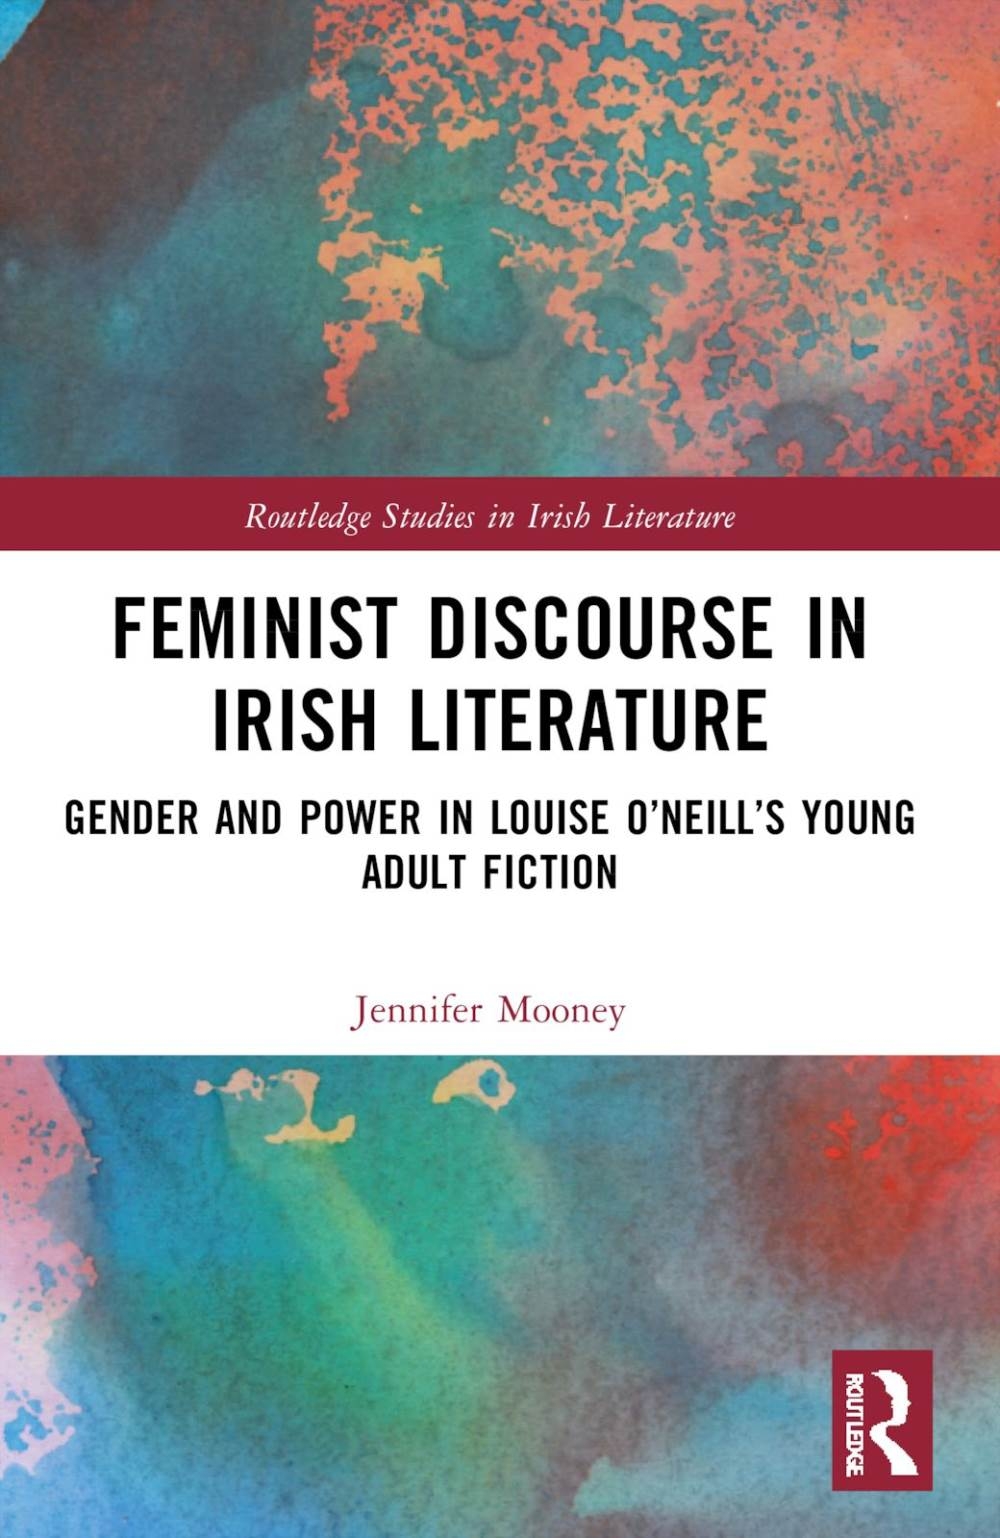 Feminist Discourse in Irish Literature: Gender and Power in Louise O’Neill’s Young Adult Fiction